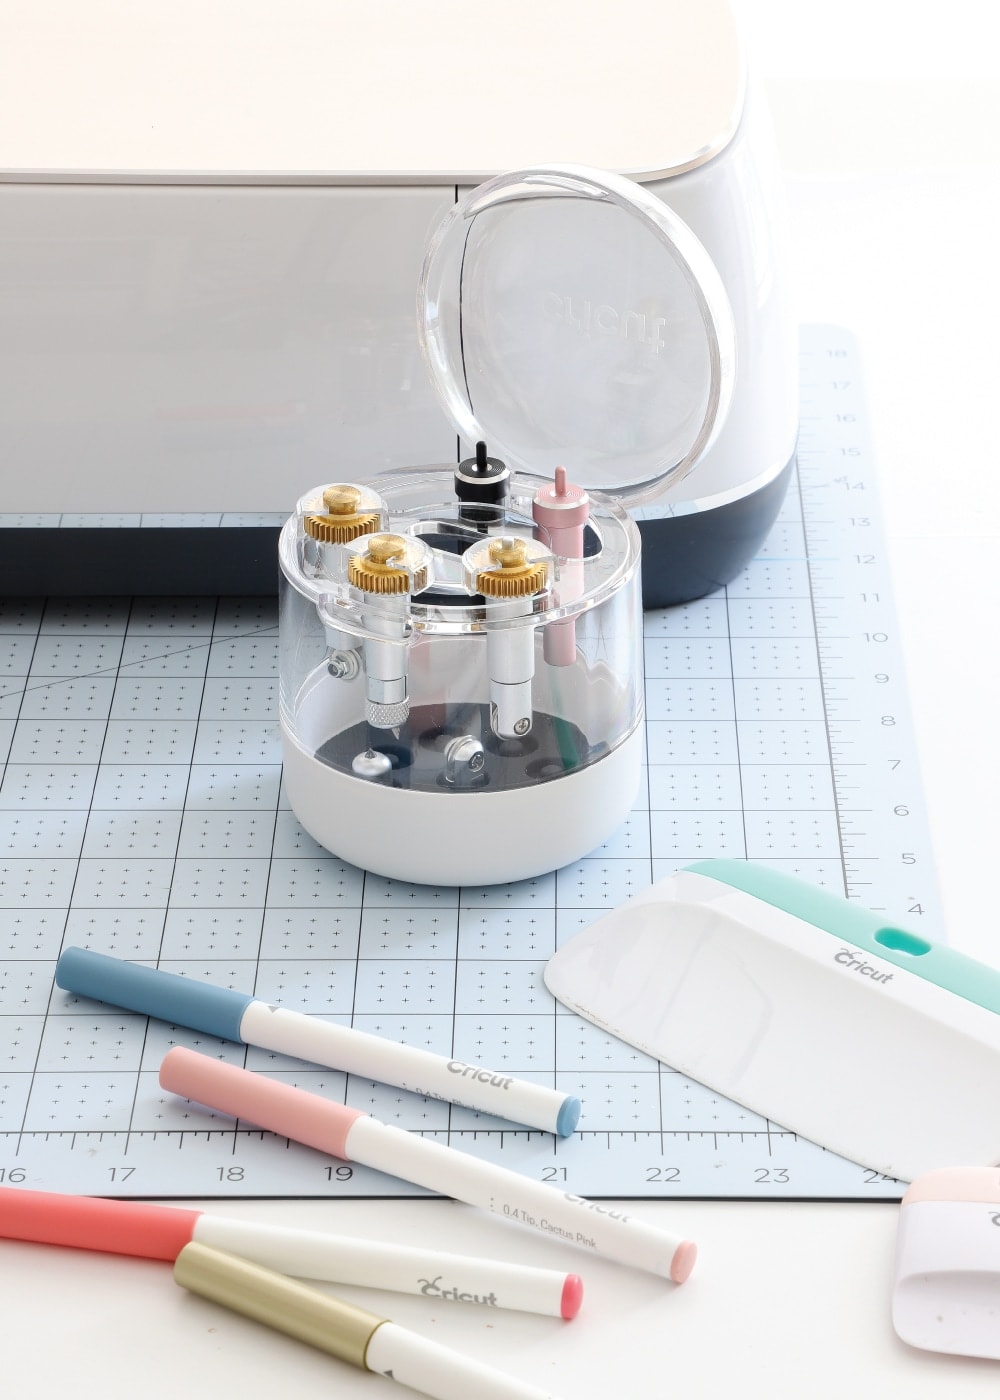 Guide to Must-Have Cricut Maker 3 Tools, Accessories & Supplies